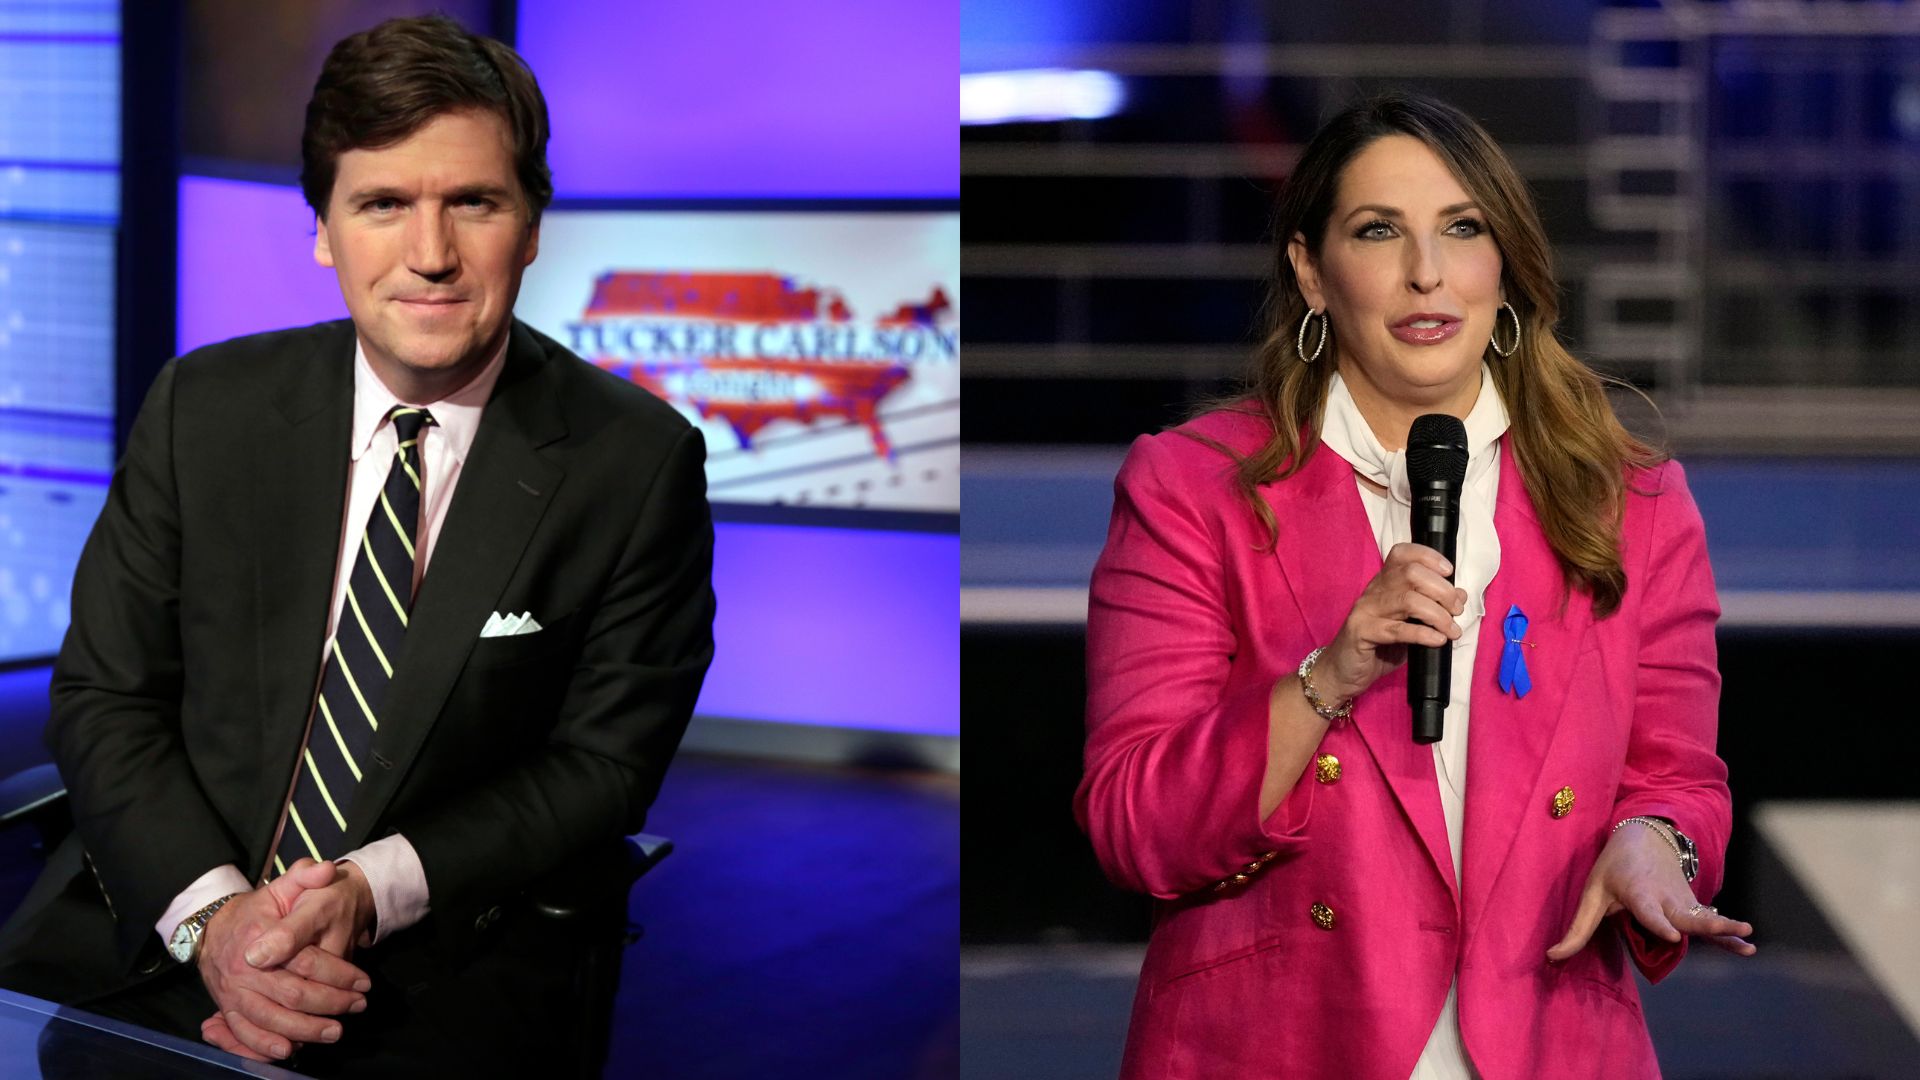 Tucker Carlson Bashes The RNC — Says He’d Host a Republican Debate Only If They Aren’t Involved